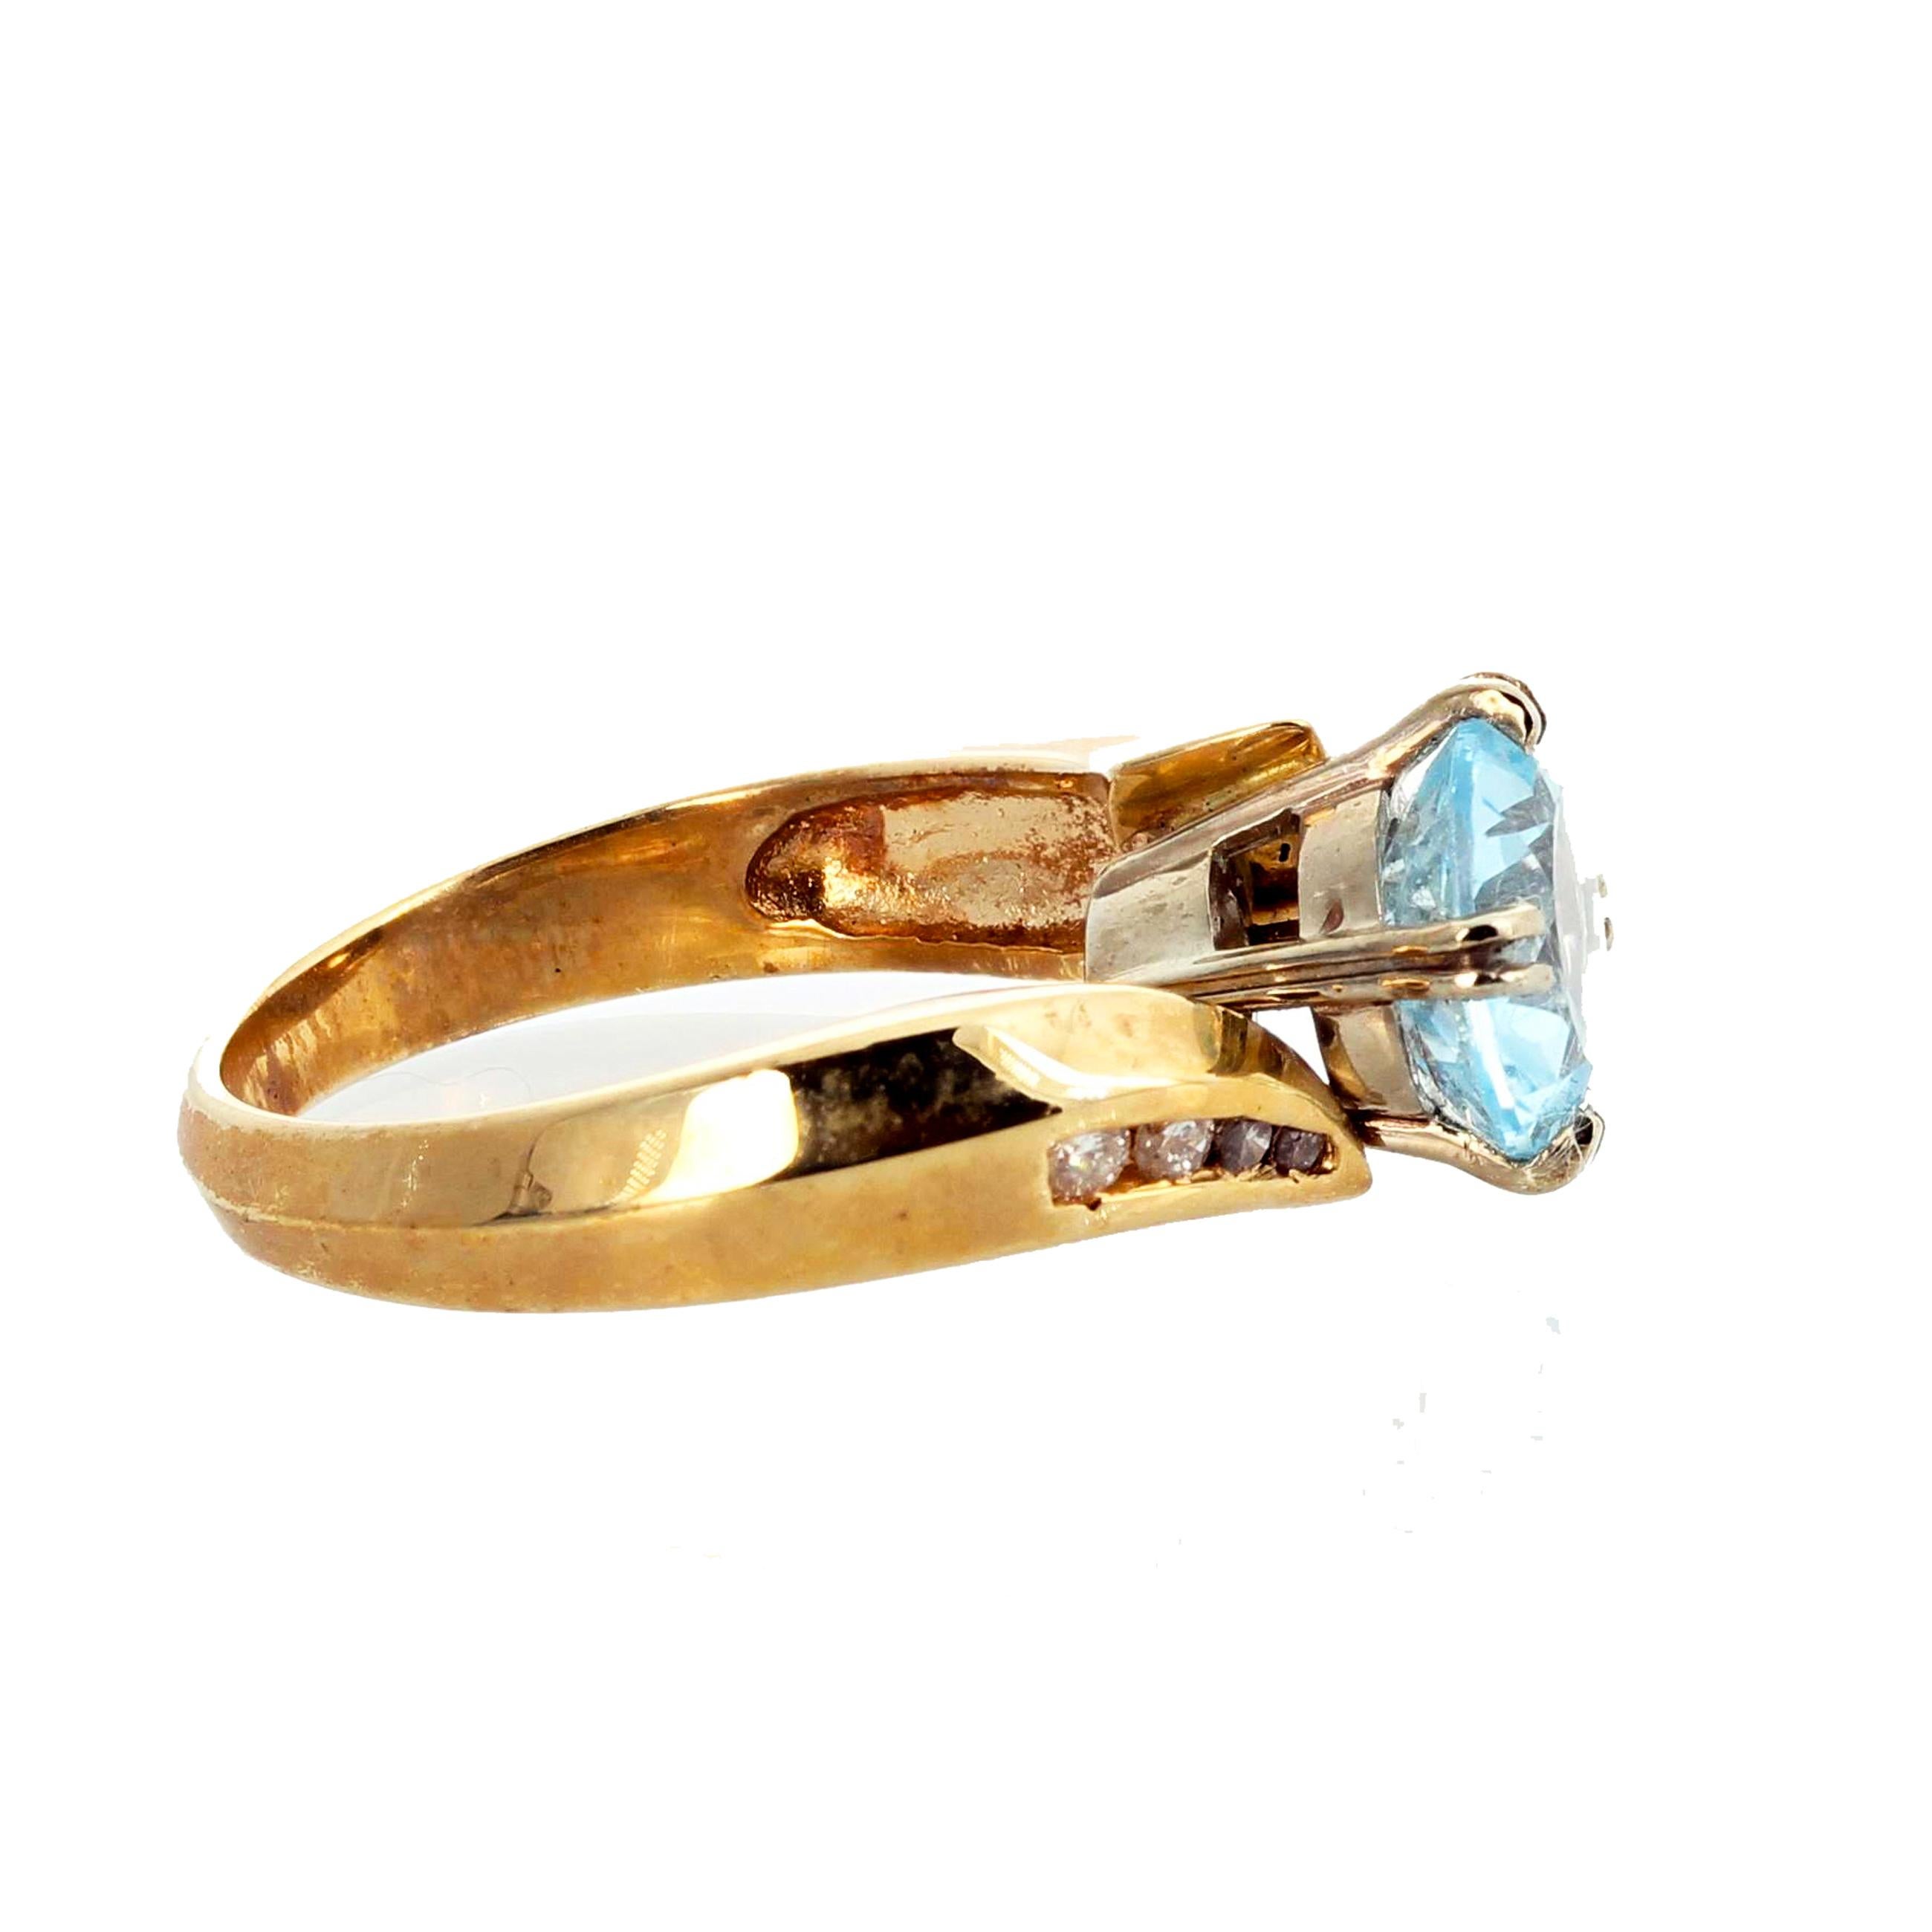 AJD Brilliant Glowing 14 Karat Yellow Gold Aquamarine and Diamonds Ring In New Condition For Sale In Raleigh, NC